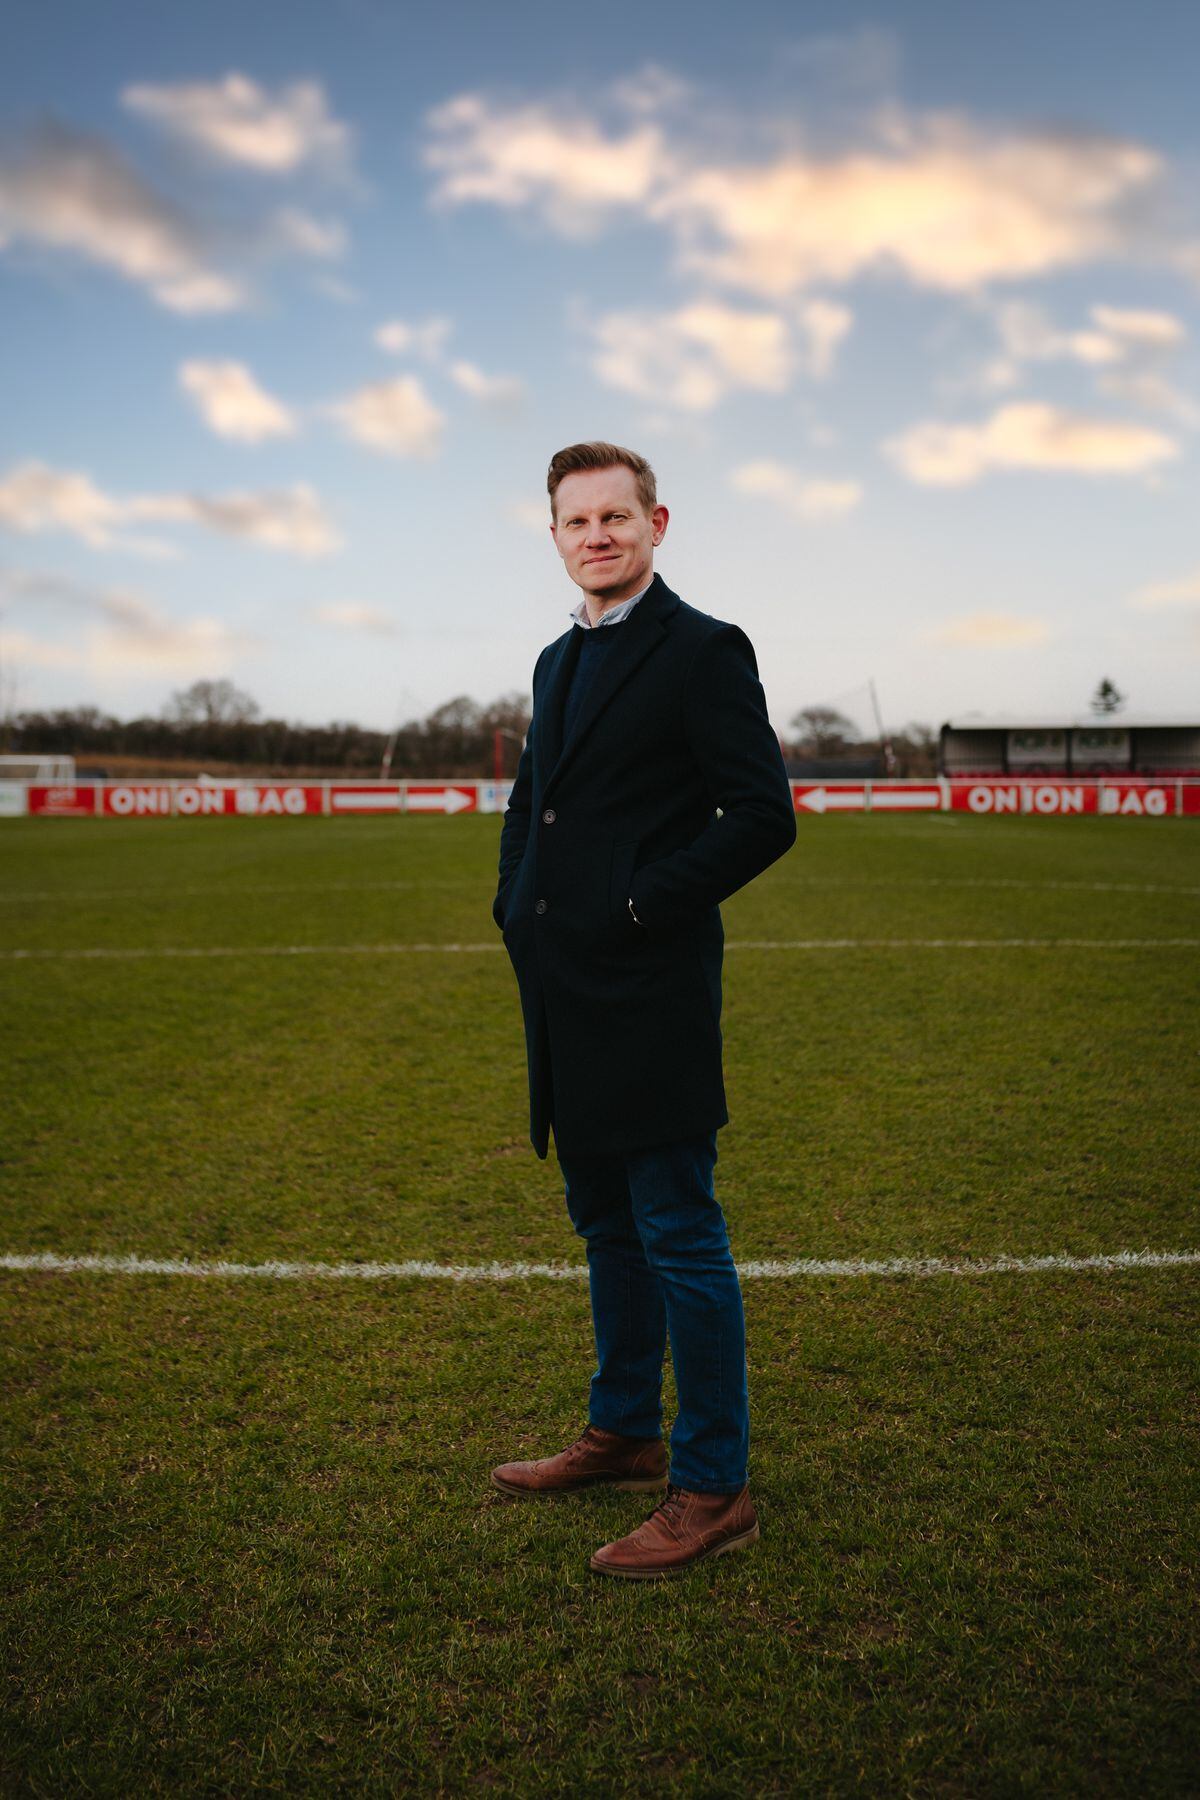 Rich Wilkinson from Whitchurch is an ex-footballer who has taking part in a documentary called "Sidelined". Pictured here at local Whitchurch Alport FC ground